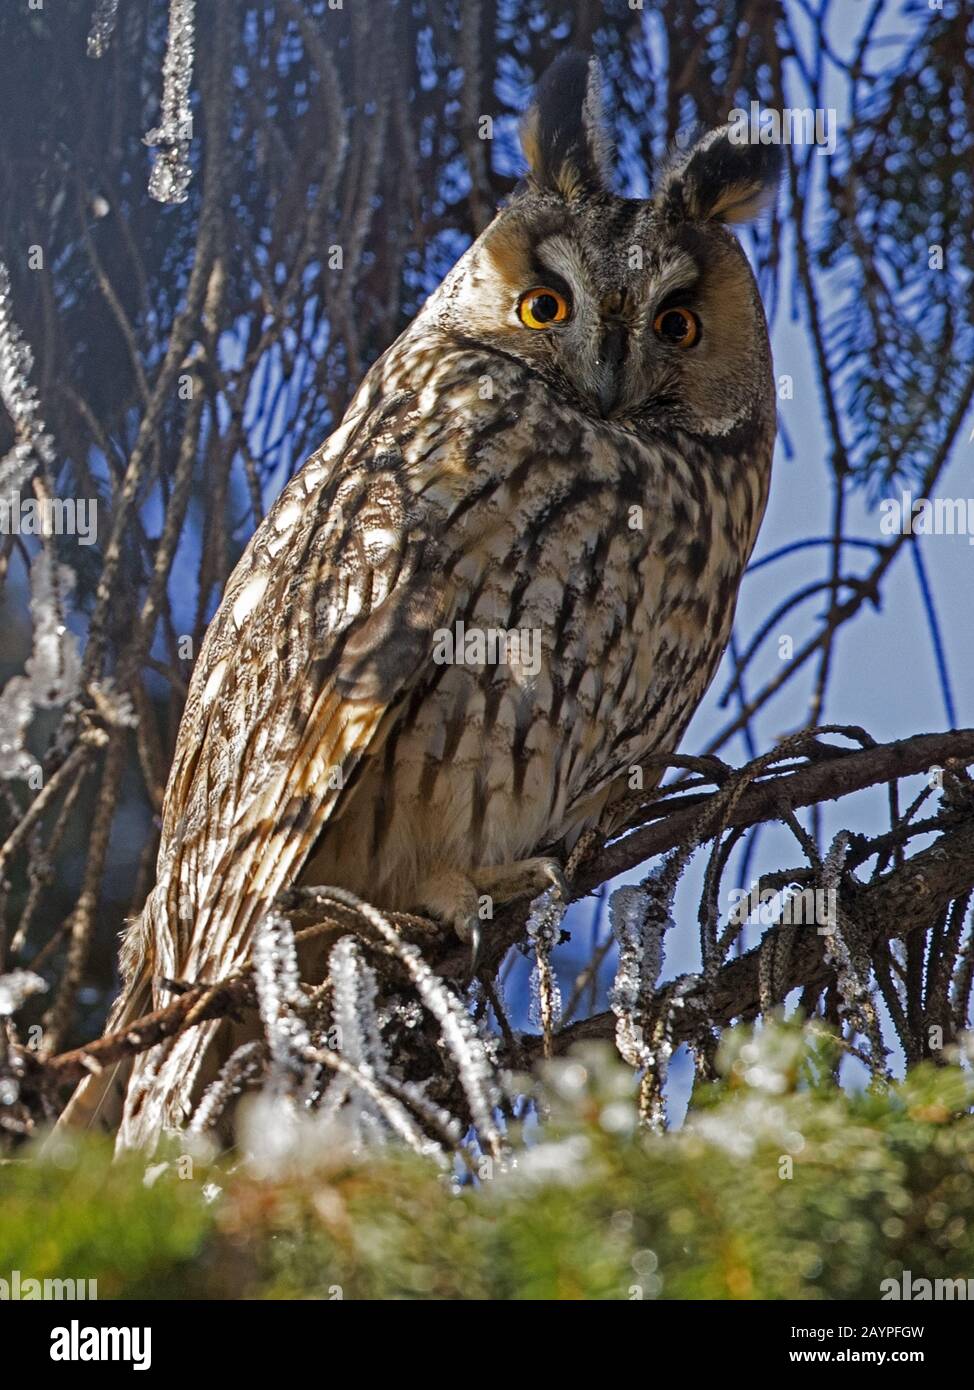 Long-eared owl perched in tree Stock Photo